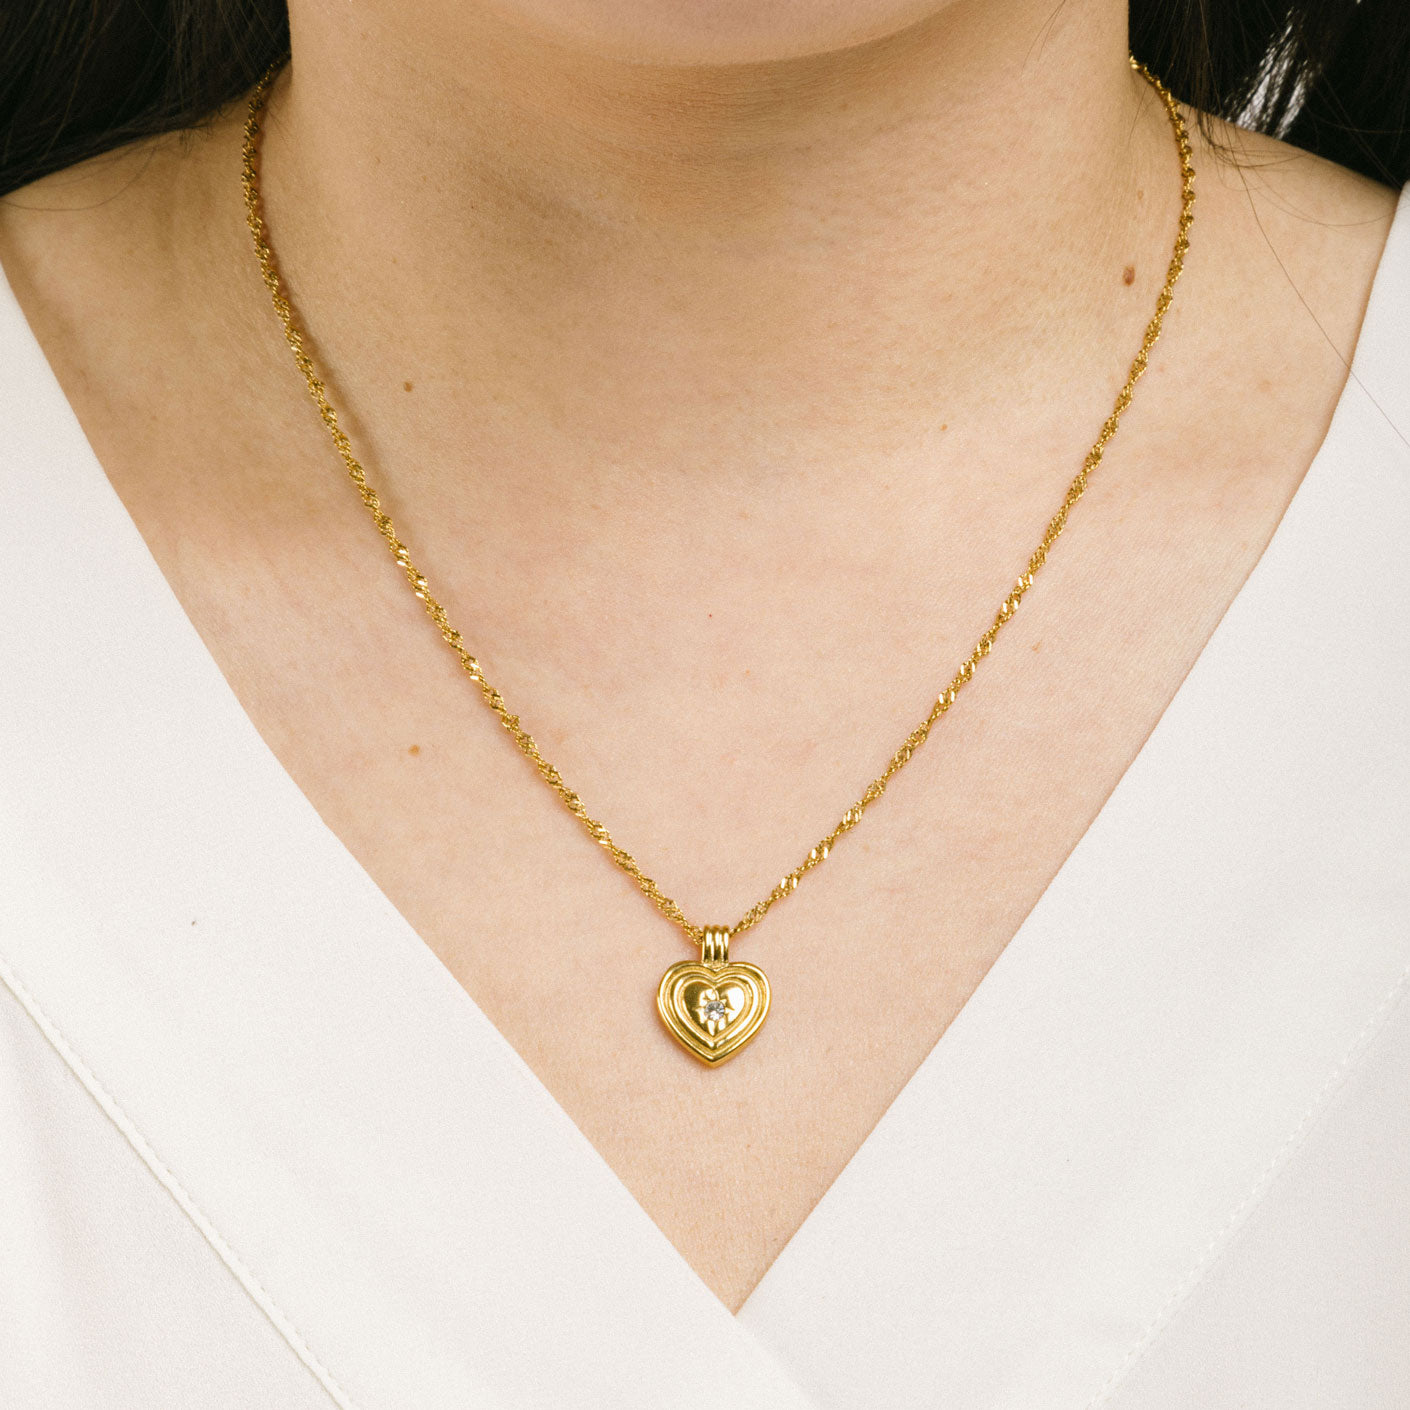 A model wearing the Ellie Heart Pendant Necklace is crafted from 14K Gold Plated Stainless Steel and embellished with Cubic Zirconia. It is adjustable and non-tarnish with great water and allergy resistance.